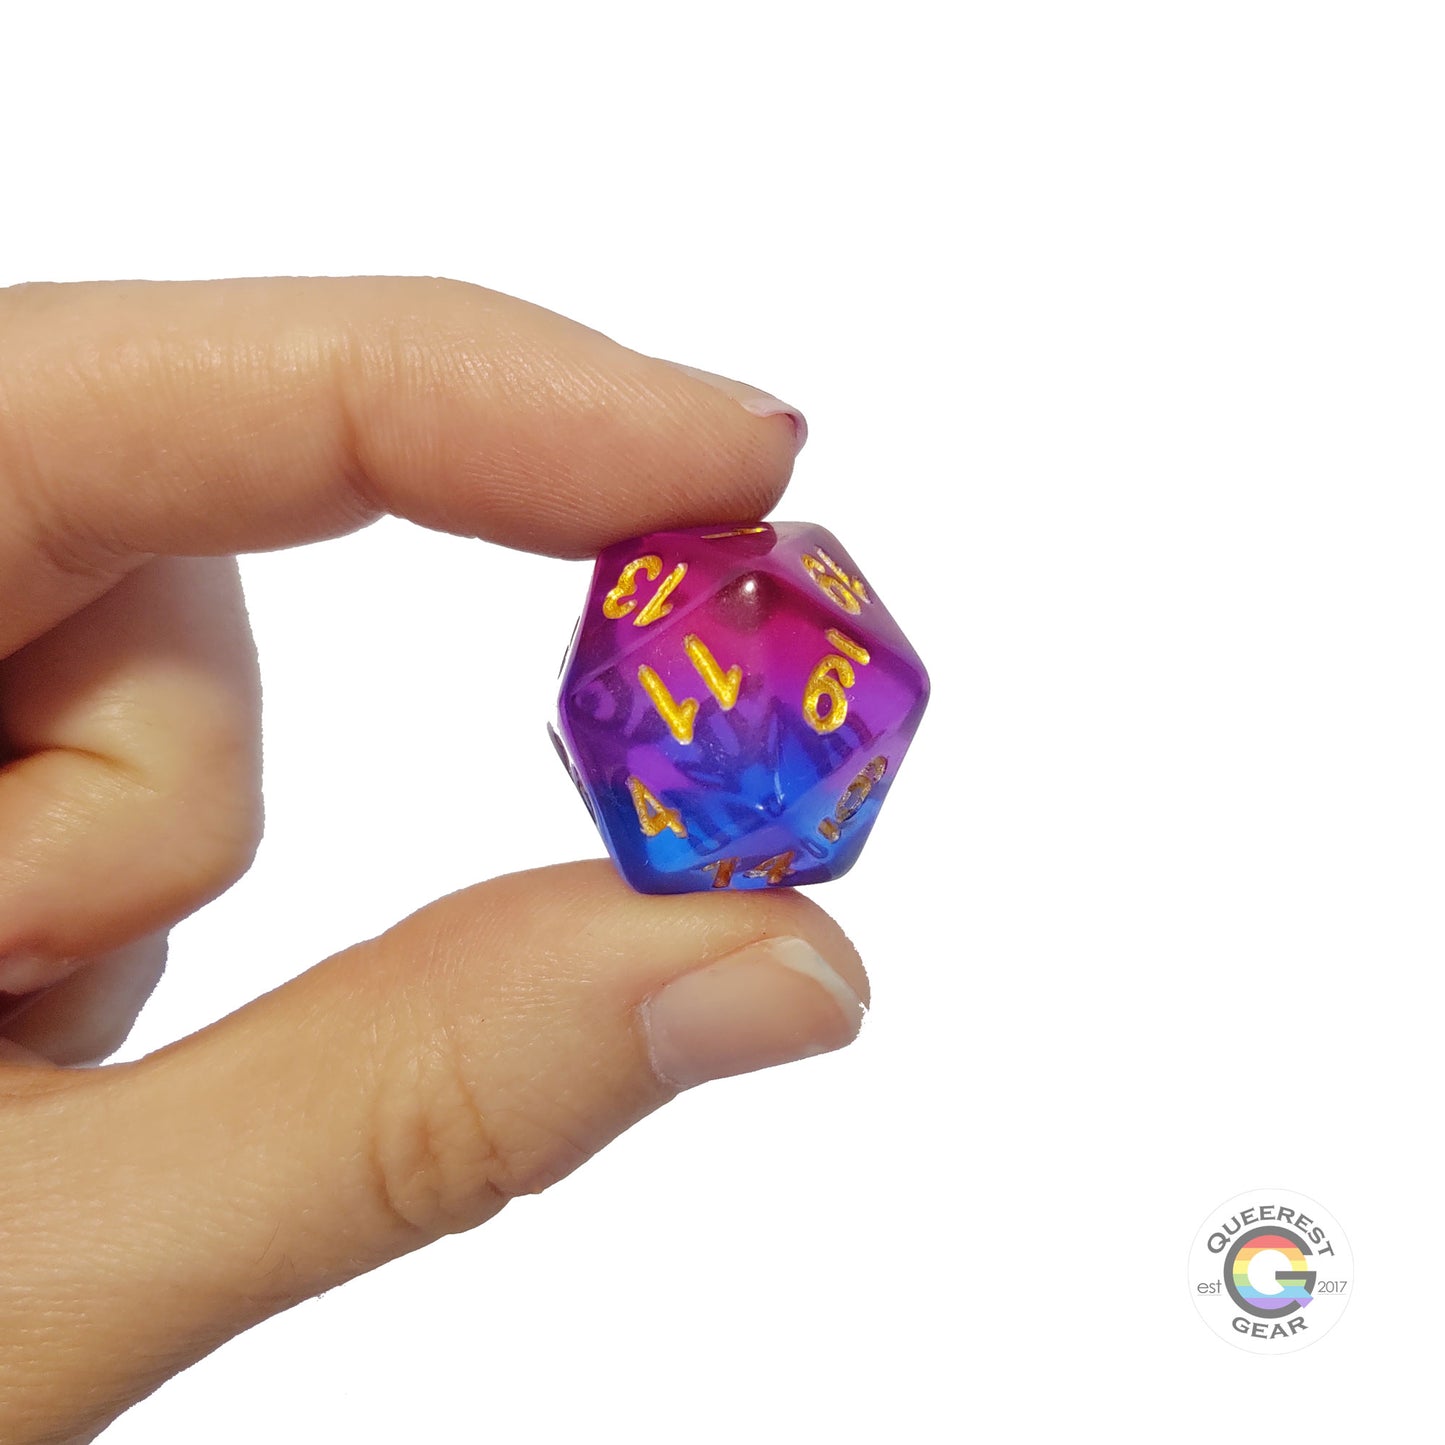 A hand holding up the bisexual d20 to show off the color and transparency